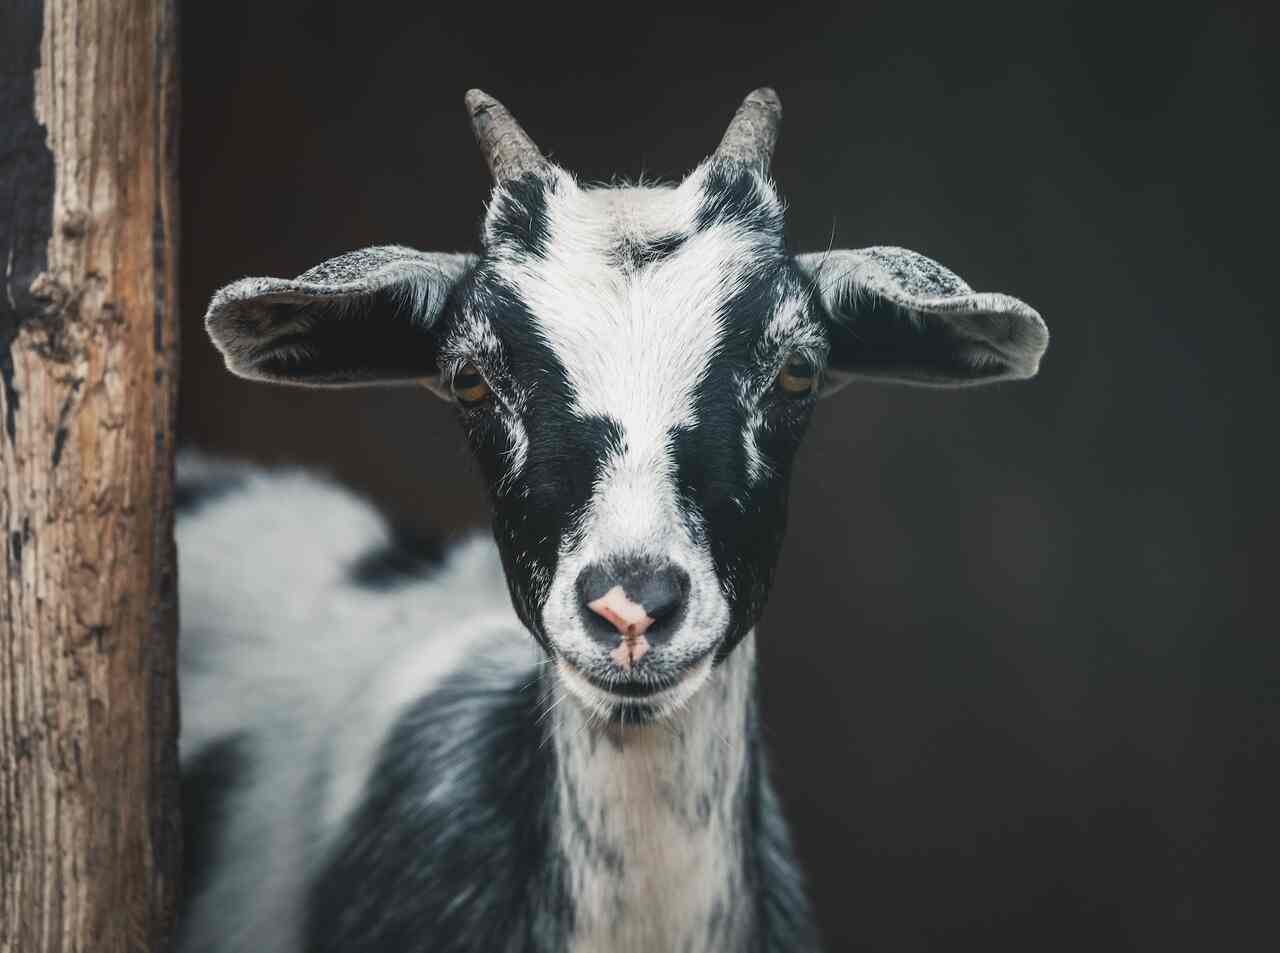 Man Arrested for Sexually Abusing Goat in India